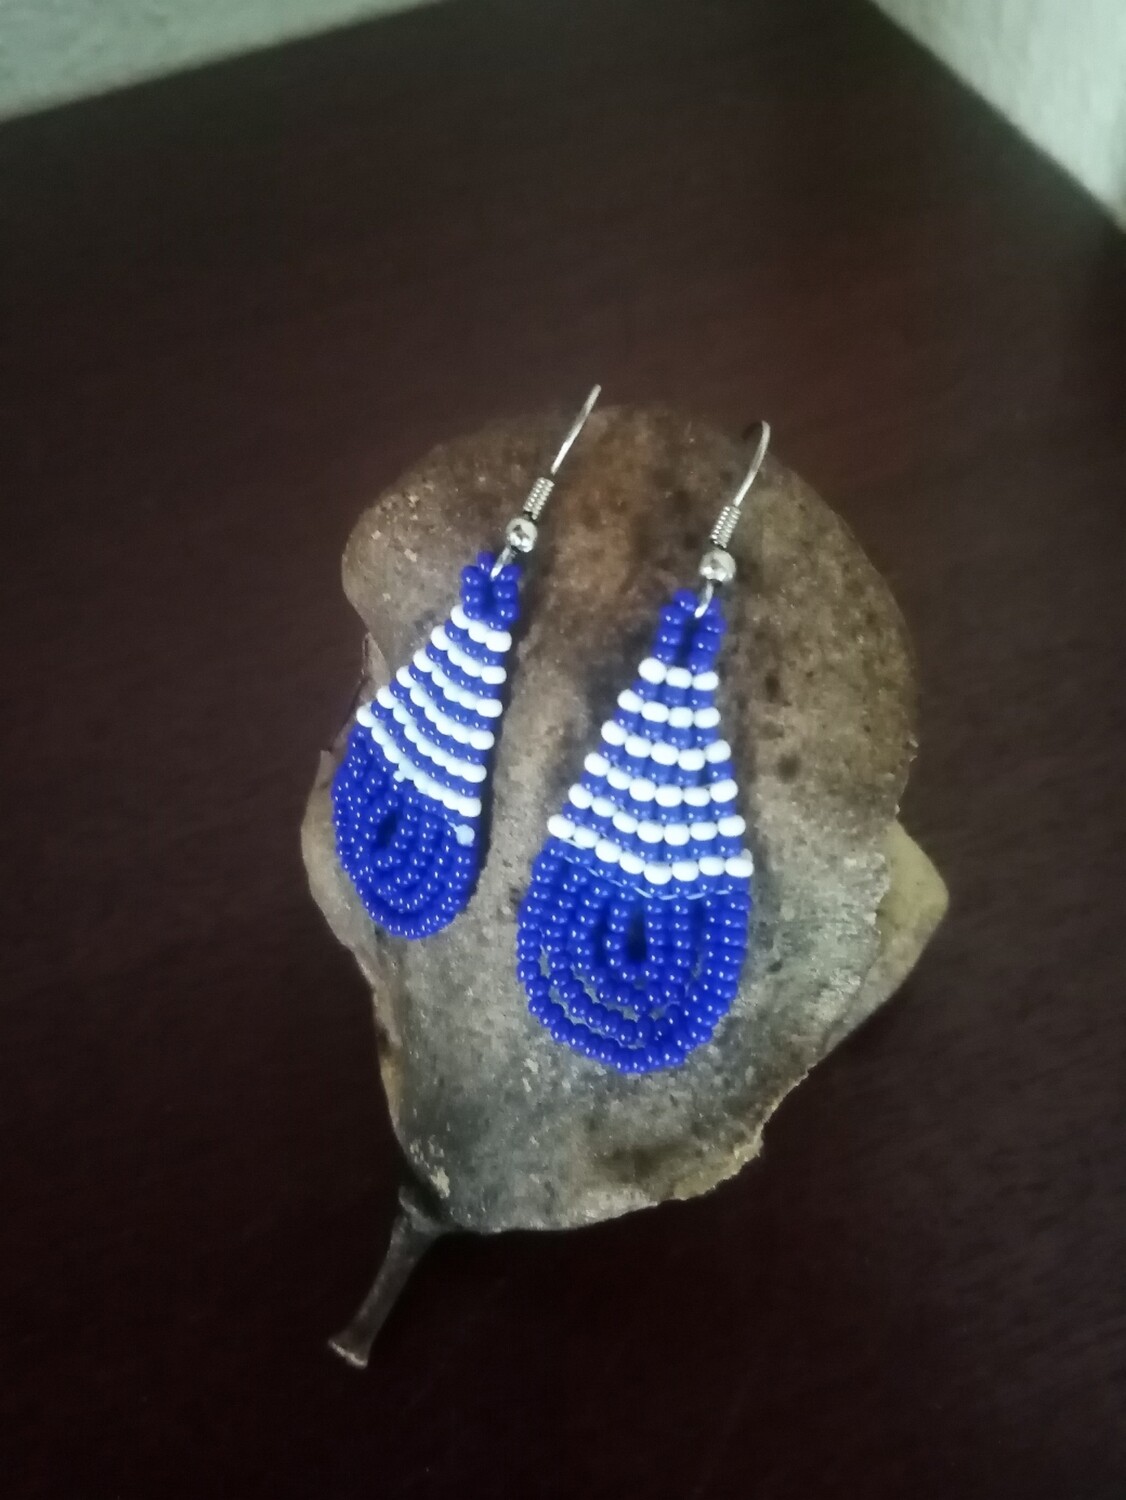 Beaded Teardrop Small Earrings - Blue and White